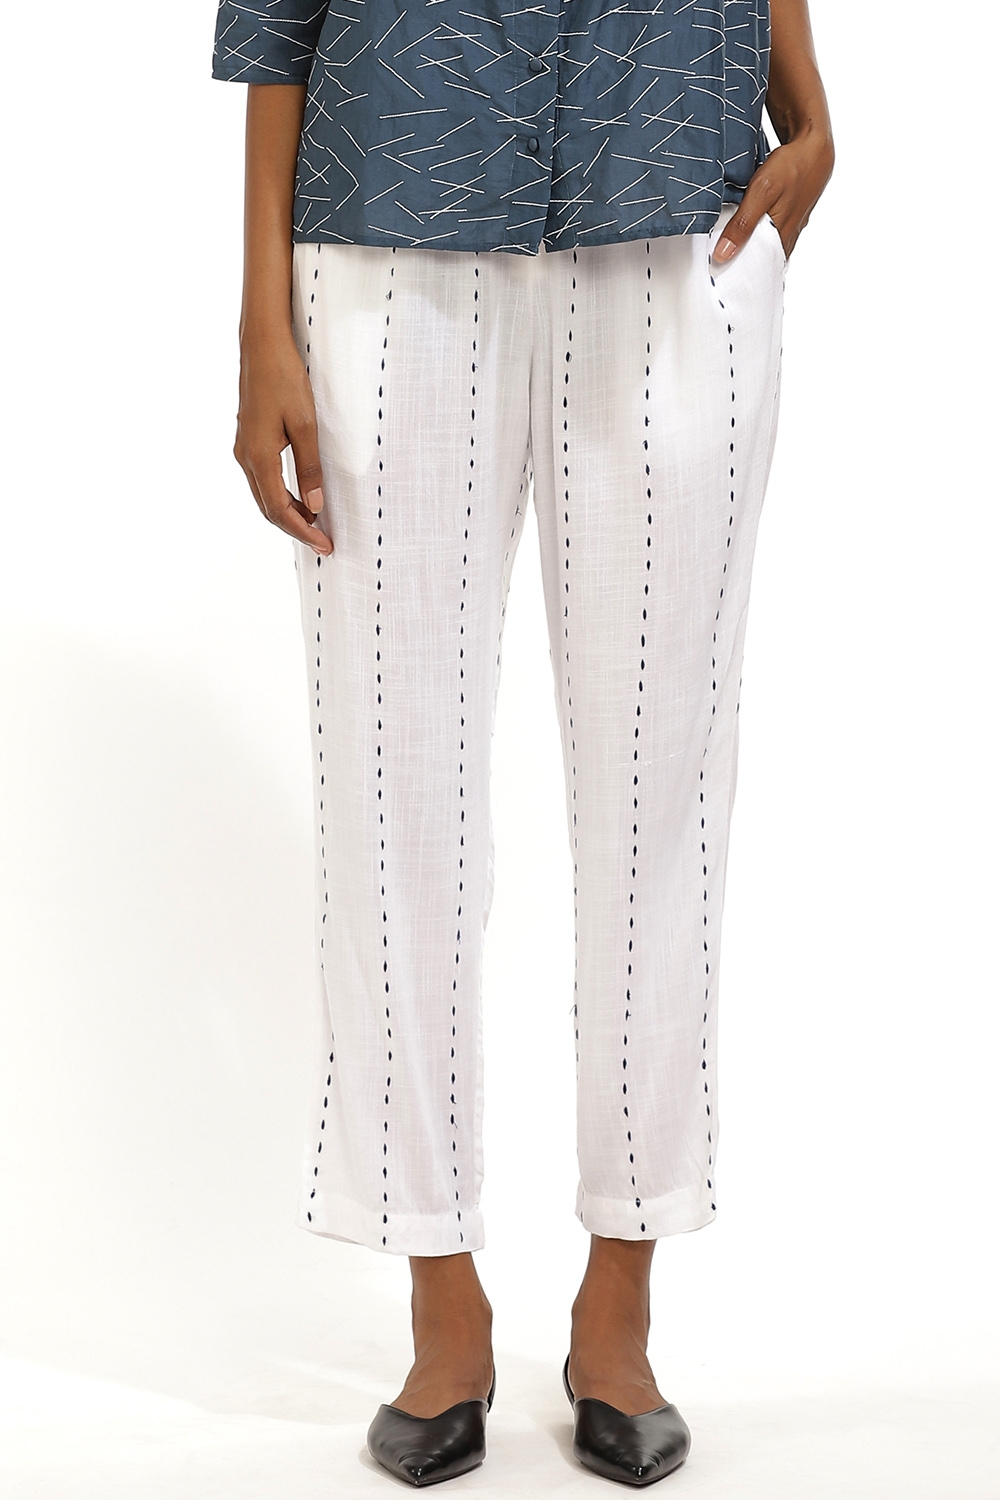 ABRAHAM AND THAKORE | Embroidered Stab Stitch Pant